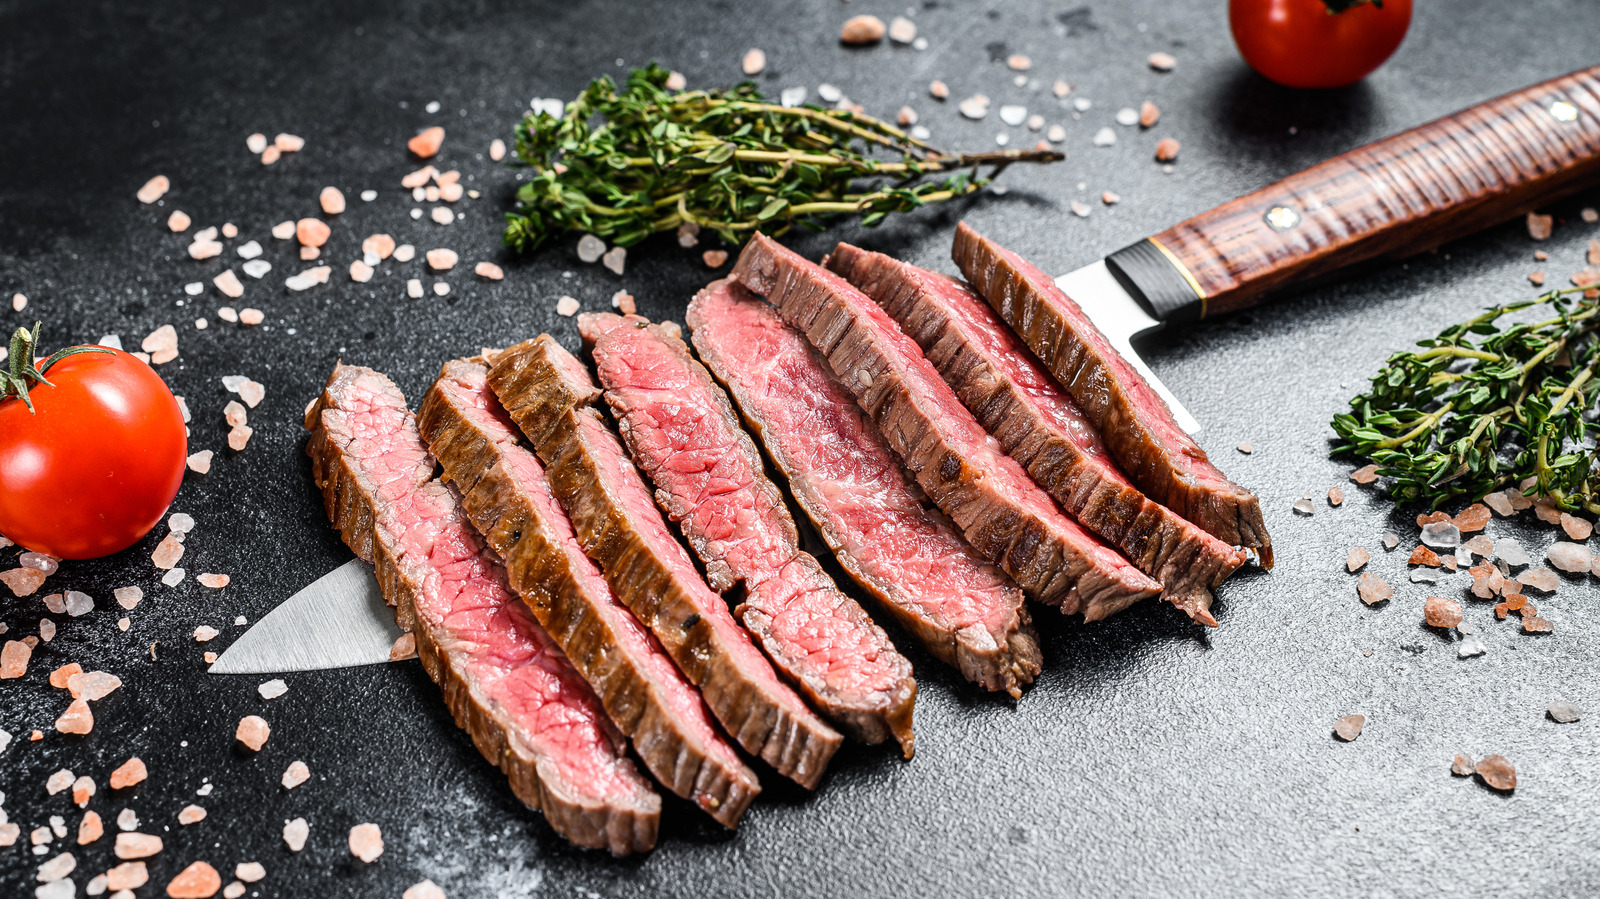 What Are the Safest Types of Meat to Eat?